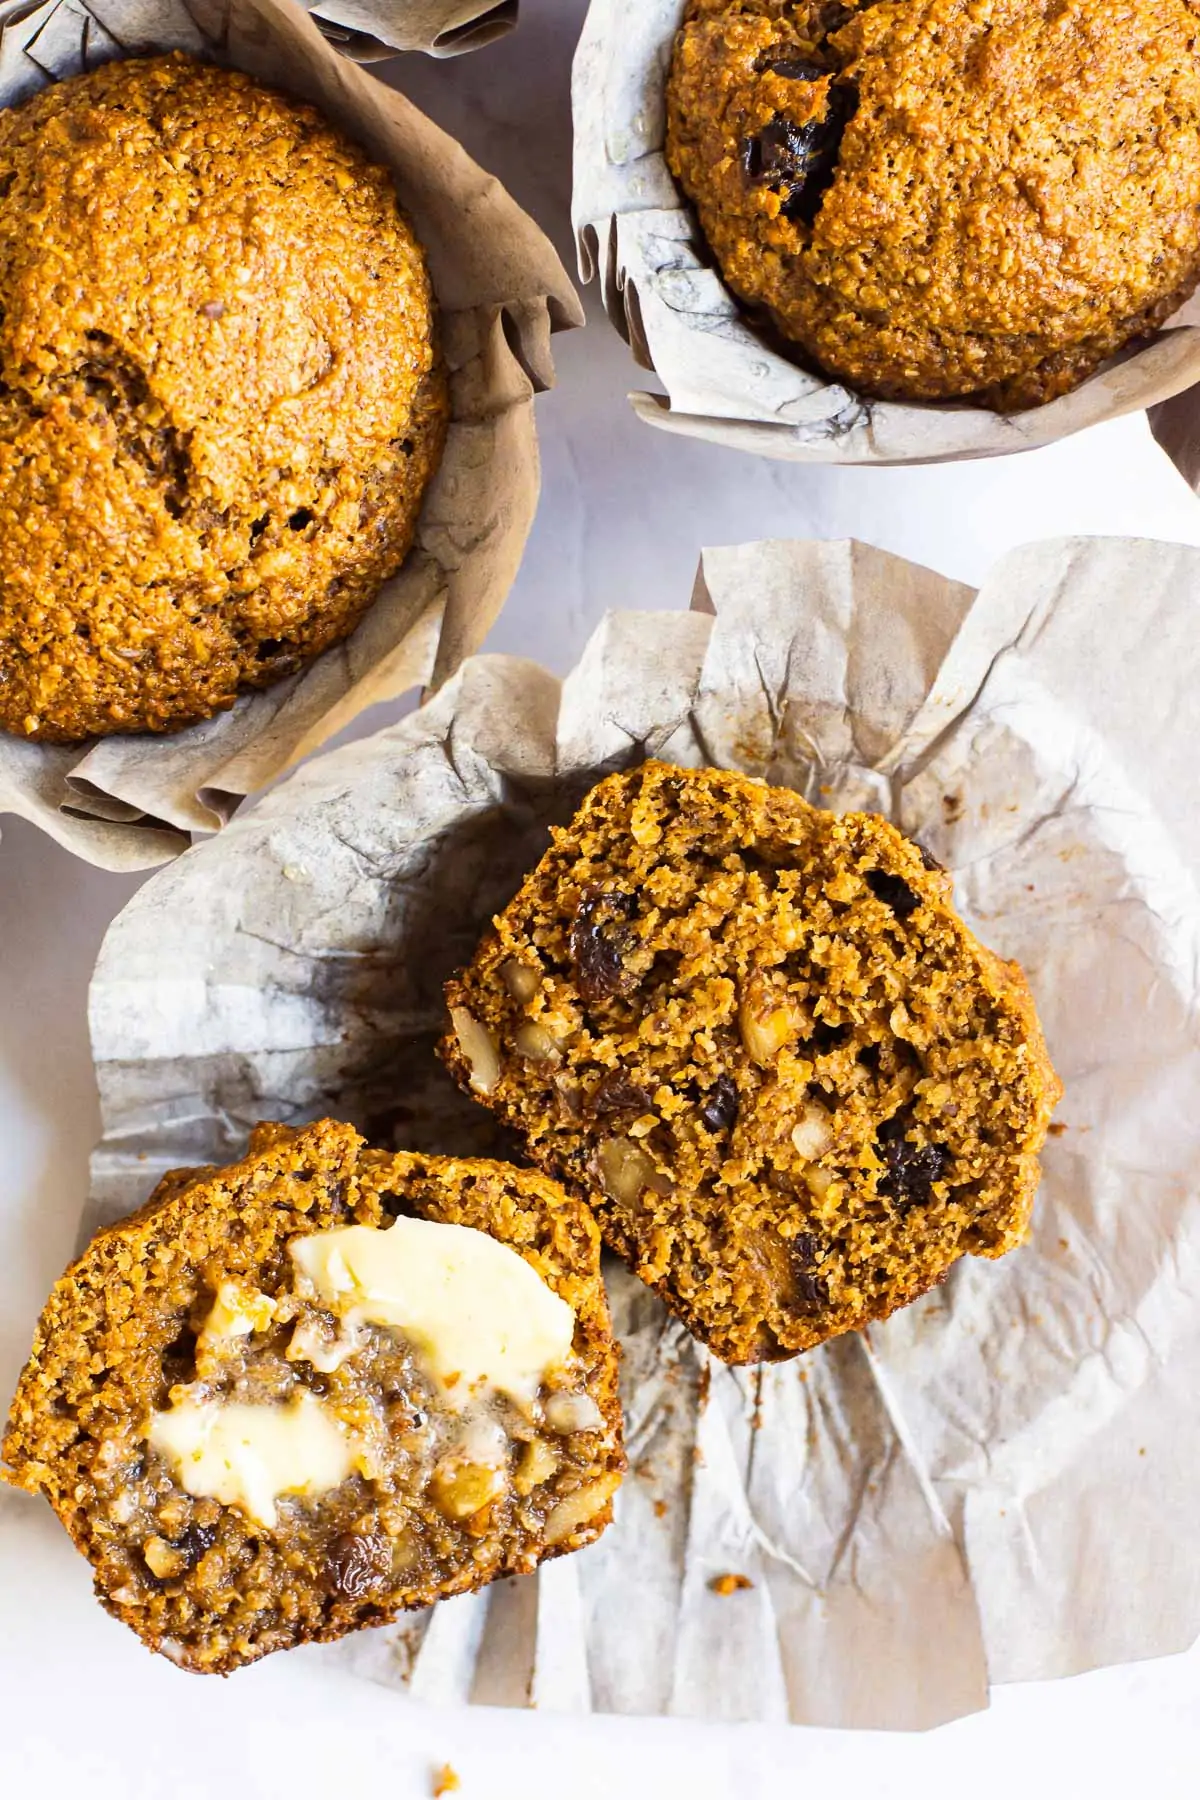 Oat Bran Muffins" />
	
	
	
	
	
	
	
	
	
	
	
	
	
	
	{"@context":"https://schema.org","@graph":[{"@type":"Organization","@id":"https://ifoodreal.com/#organization","name":"iFoodreal","url":"https://ifoodreal.com/","sameAs":["https://www.facebook.com/iFOODreal/","https://www.instagram.com/ifoodreal/","https://www.pinterest.com/ifoodreal/","https://twitter.com/ifoodreal"],"logo":{"@type":"ImageObject","@id":"https://ifoodreal.com/#logo","inLanguage":"en-US","url":"https://ifoodreal.com/wp-content/uploads/2017/11/ifrLogo-1.png","contentUrl":"https://ifoodreal.com/wp-content/uploads/2017/11/ifrLogo-1.png","width":150,"height":37,"caption":"iFoodreal"},"image":{"@id":"https://ifoodreal.com/#logo"}},{"@type":"WebSite","@id":"https://ifoodreal.com/#website","url":"https://ifoodreal.com/","name":"iFOODreal.com","description":"","publisher":{"@id":"https://ifoodreal.com/#organization"},"potentialAction":[{"@type":"SearchAction","target":{"@type":"EntryPoint","urlTemplate":"https://ifoodreal.com/?s={search_term_string}"},"query-input":"required name=search_term_string"}],"inLanguage":"en-US"},{"@type":"ImageObject","@id":"https://ifoodreal.com/healthy-oat-bran-muffins/#primaryimage","inLanguage":"en-US","url":"https://ifoodreal.com/wp-content/uploads/2022/02/fg-healthy-oat-bran-muffins-recipe.jpg","contentUrl":"https://ifoodreal.com/wp-content/uploads/2022/02/fg-healthy-oat-bran-muffins-recipe.jpg","width":1250,"height":1250,"caption":"oat bran muffins in parchment liners"},{"@type":["WebPage","FAQPage"],"@id":"https://ifoodreal.com/healthy-oat-bran-muffins/#webpage","url":"https://ifoodreal.com/healthy-oat-bran-muffins/","name":"Oat Bran Muffins {Healthy!}